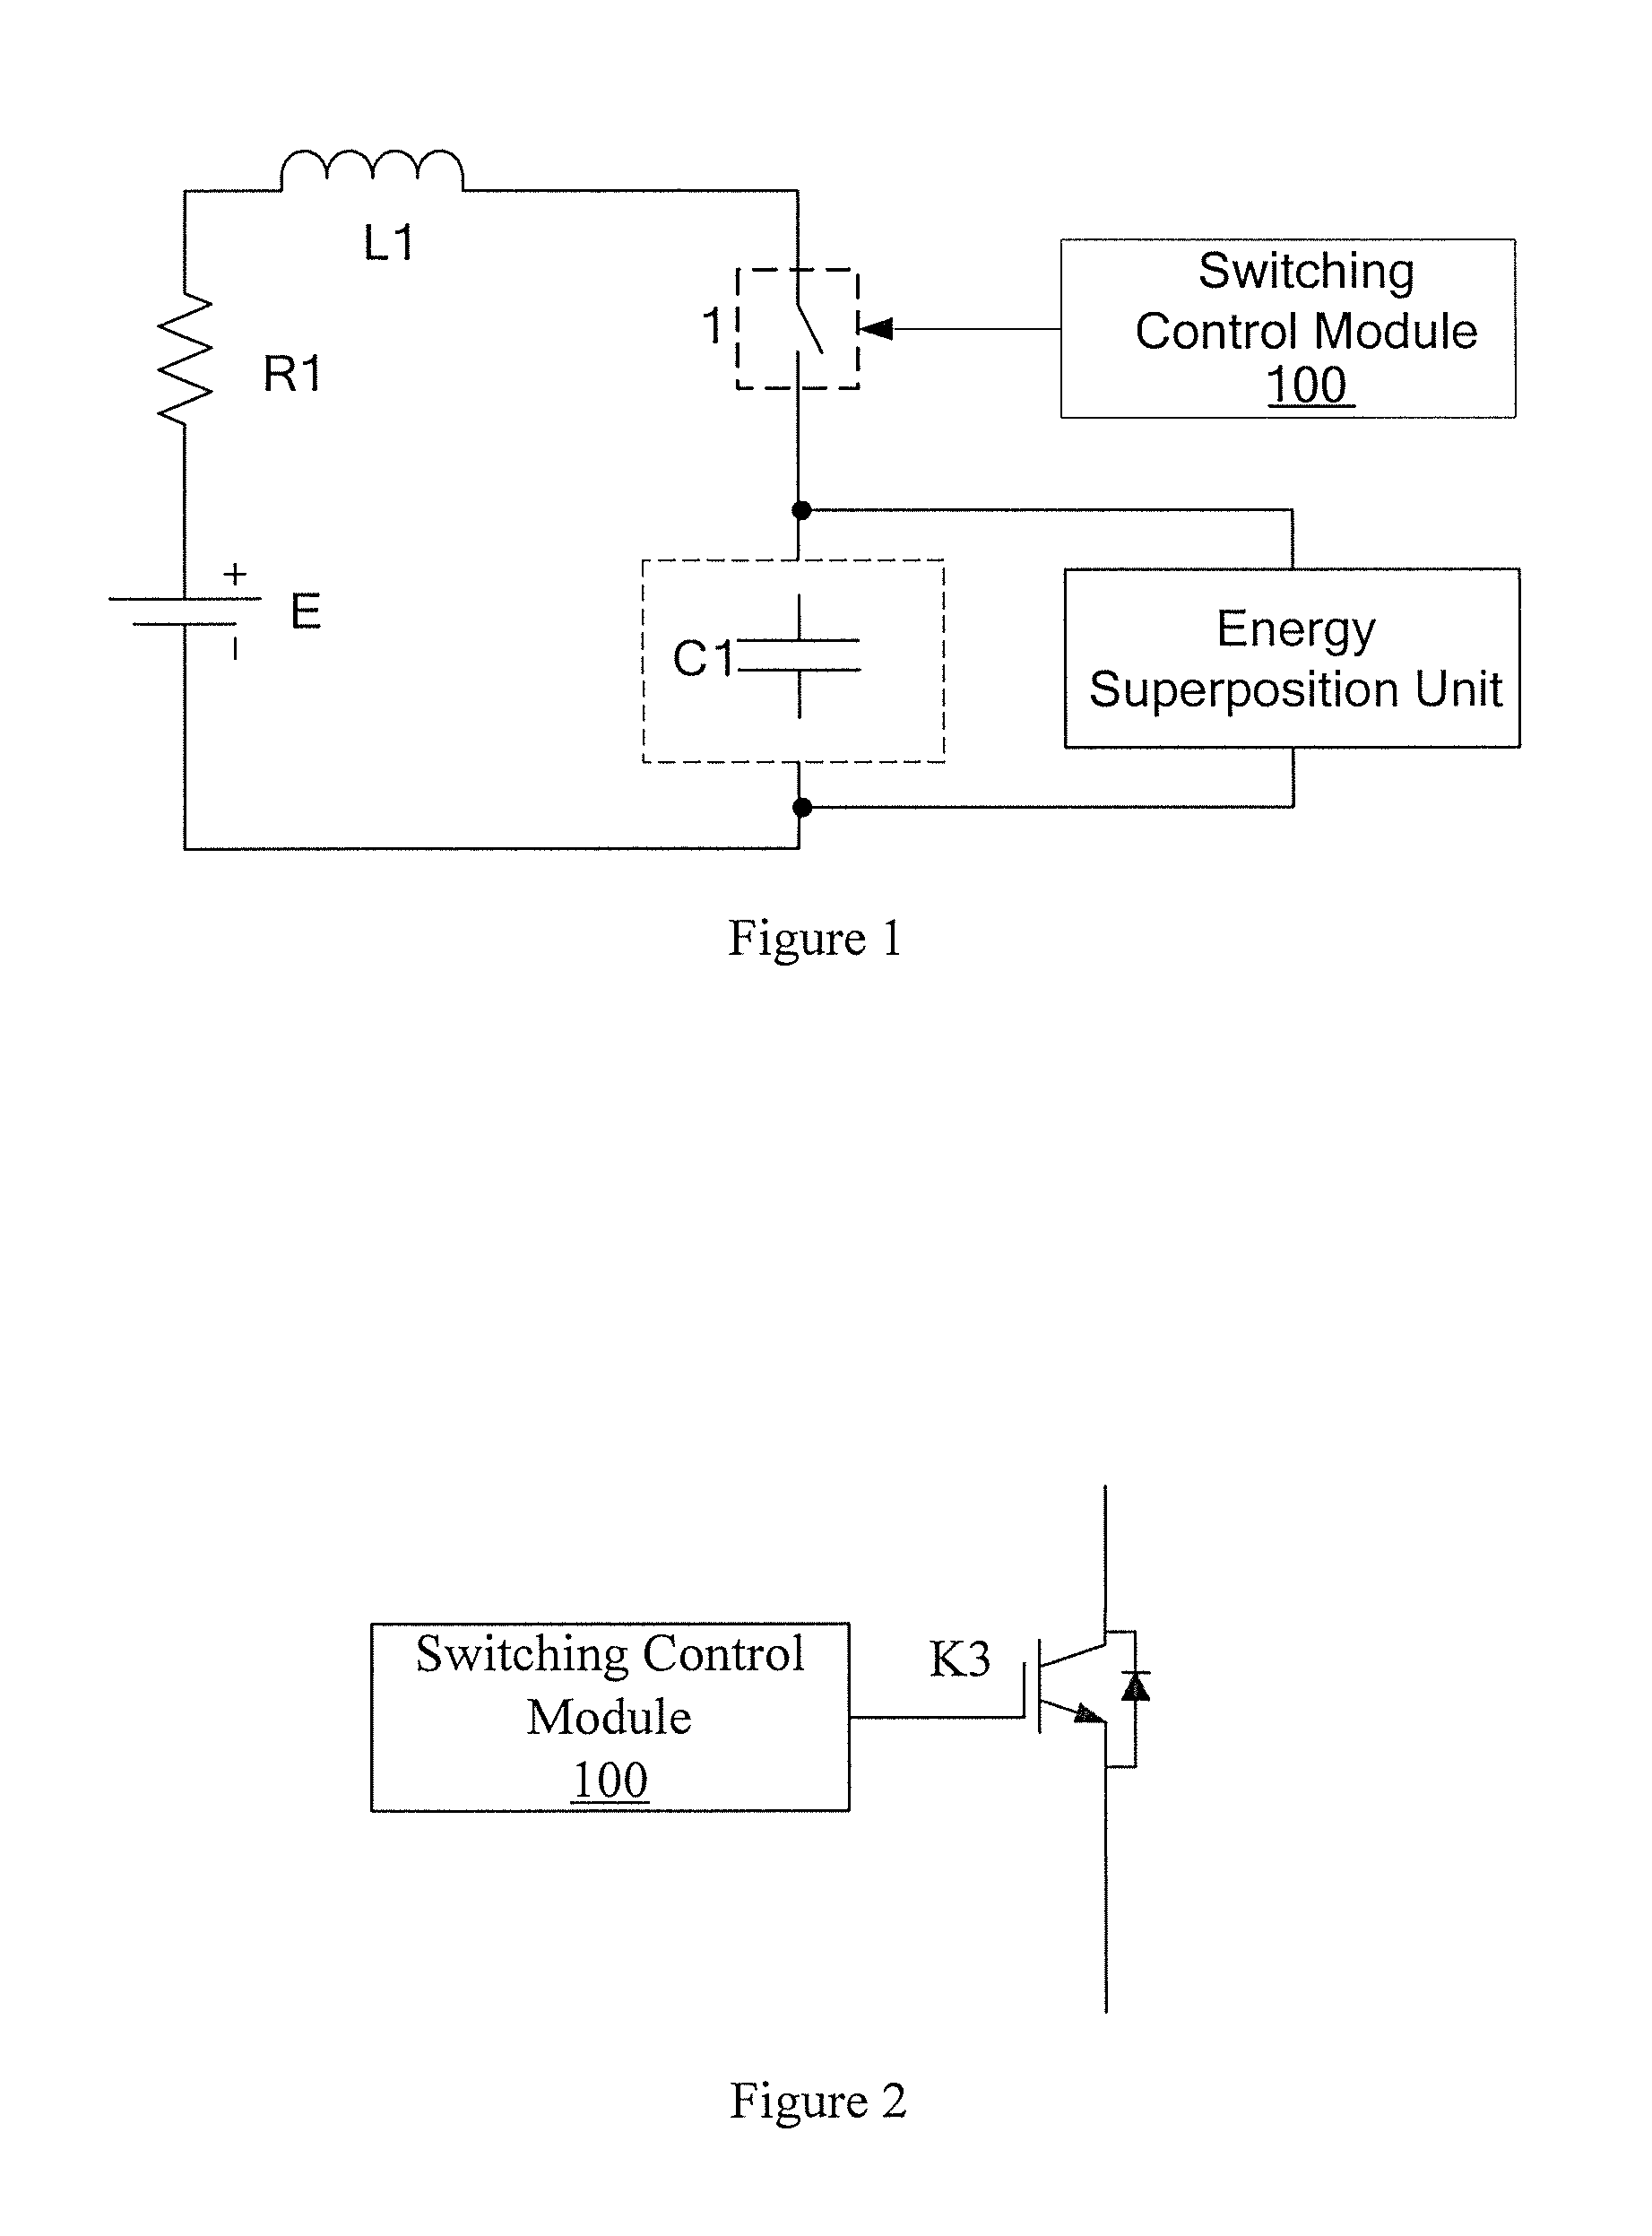 Battery heating circuits and methods using voltage inversion based on predetermined conditions